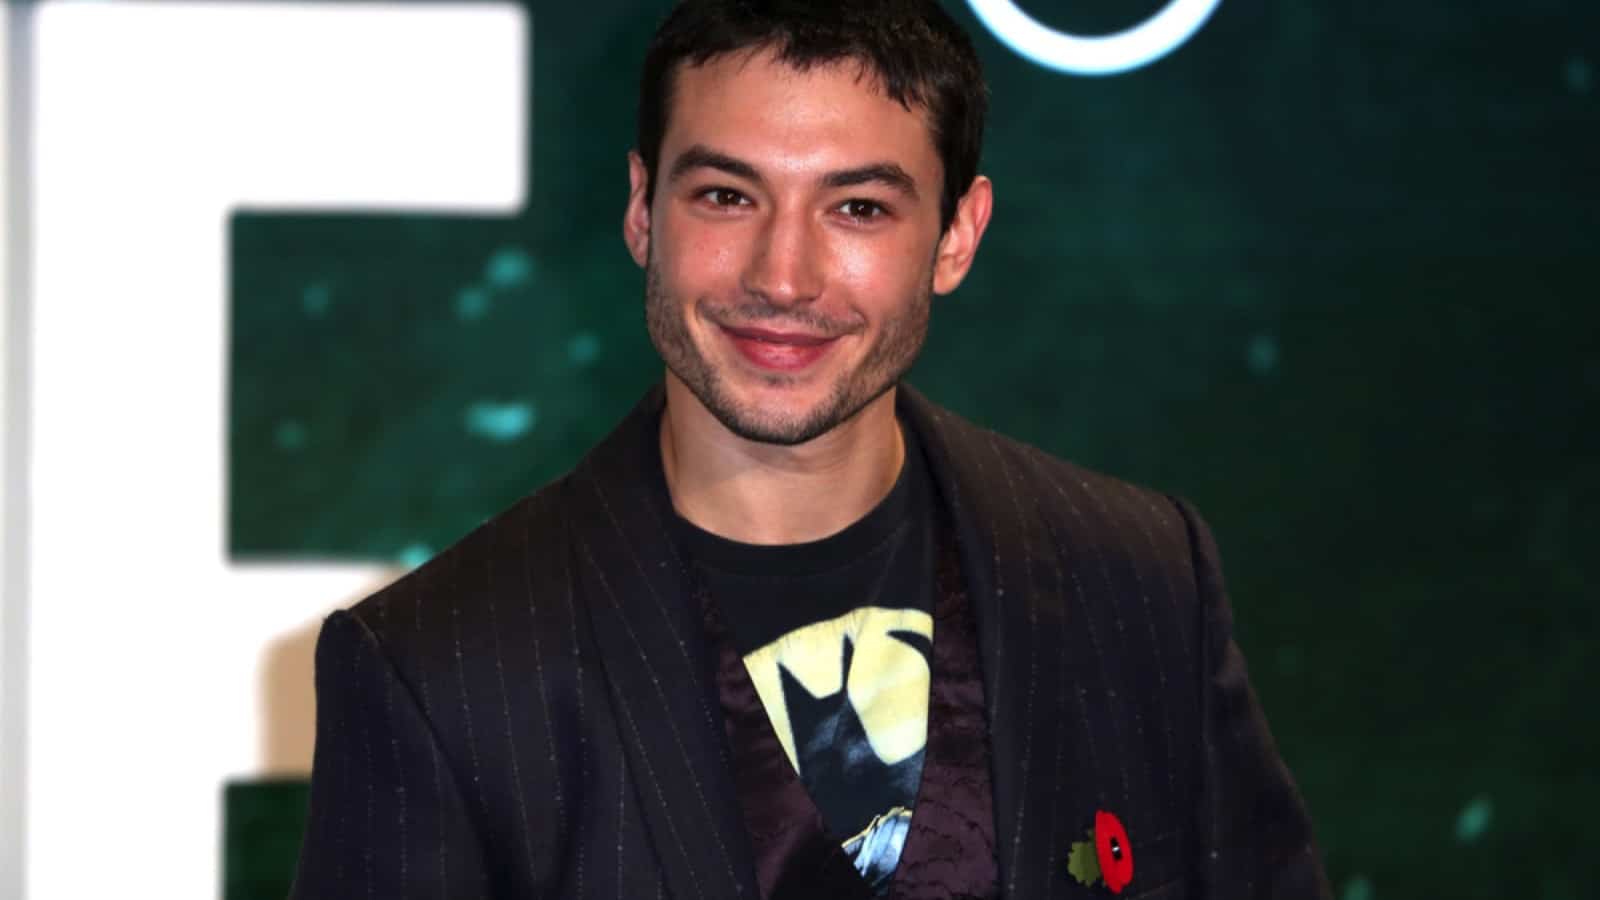 London, United Kingdom - November 4, 2017: Ezra Miller attends the 'Justice League' photocall at The College in London, England.